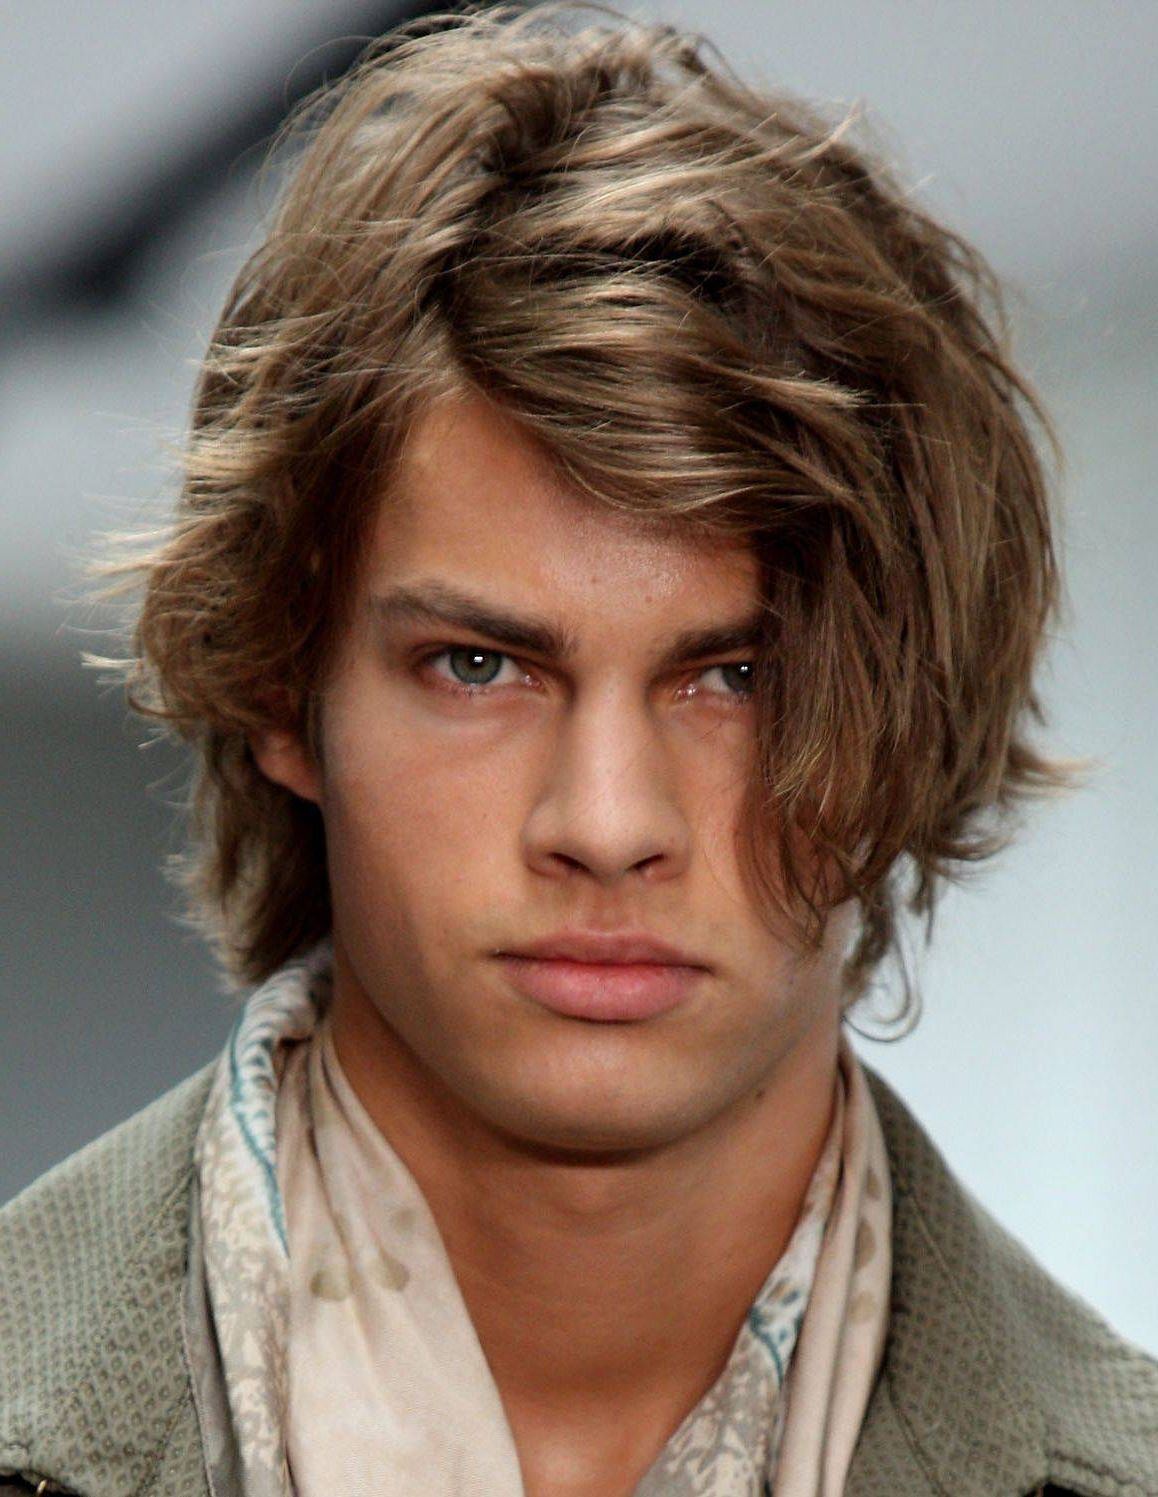 Hippie Hairstyles For Men 27 Best Hairstyles For A Hipster Look Throughout Hippie Short Hairstyles (View 14 of 25)